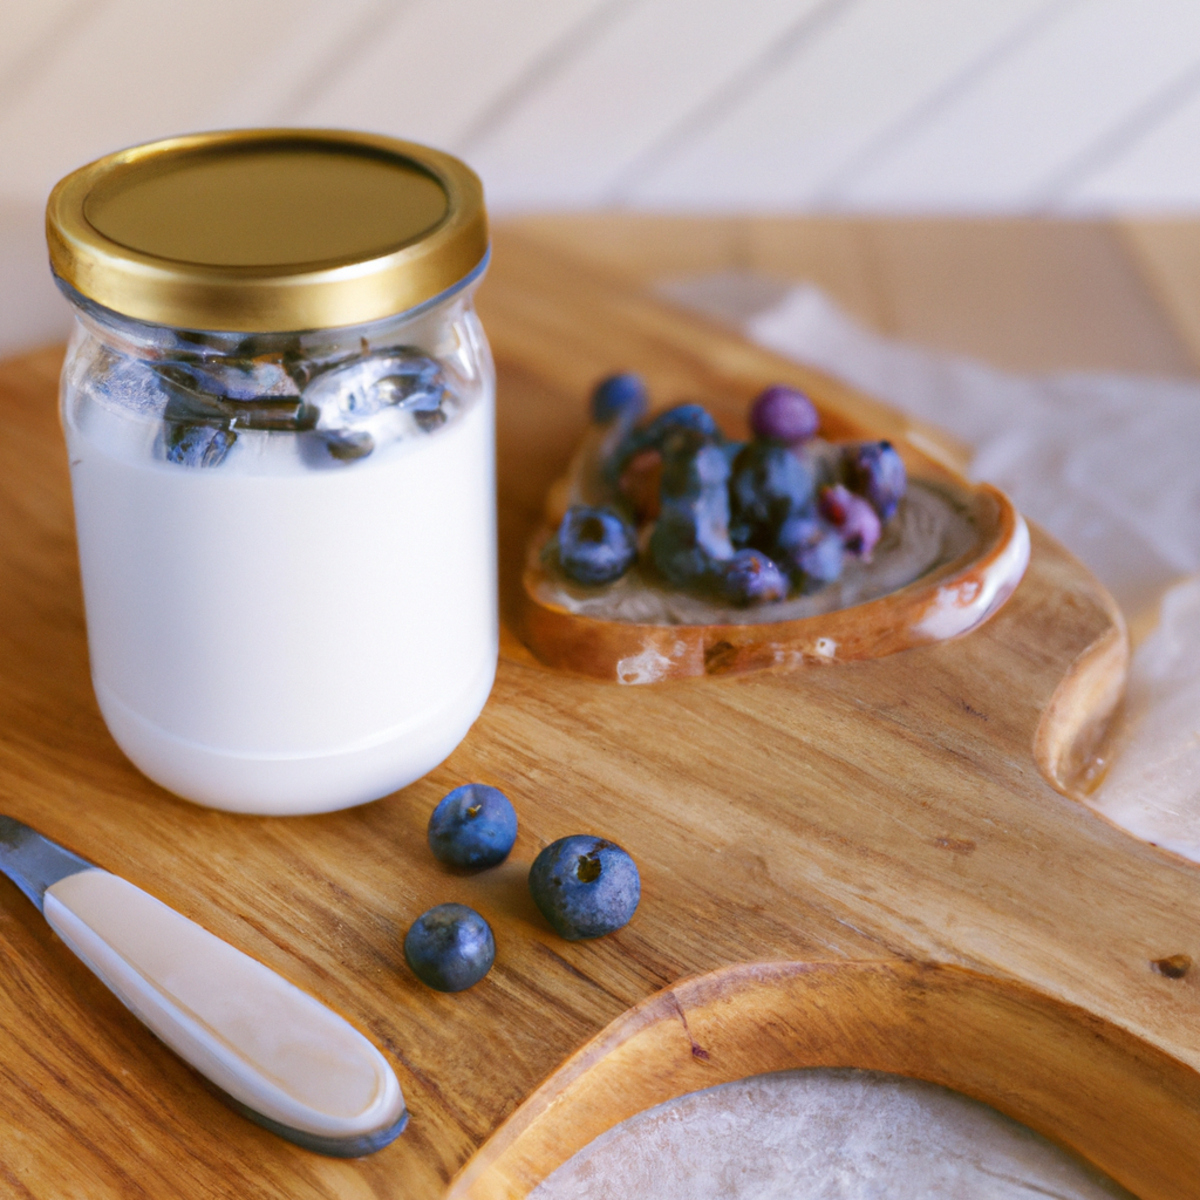 The photo shows a close-up of a glass jar filled with a creamy, white substance - probiotic yogurt. Next to it, there is a small bowl of blueberries and a spoon. In the background, there is a wooden cutting board with slices of whole grain bread and a knife. The composition suggests a healthy breakfast or snack, highlighting the importance of incorporating probiotics into one's diet for better gut health and overall well-being.